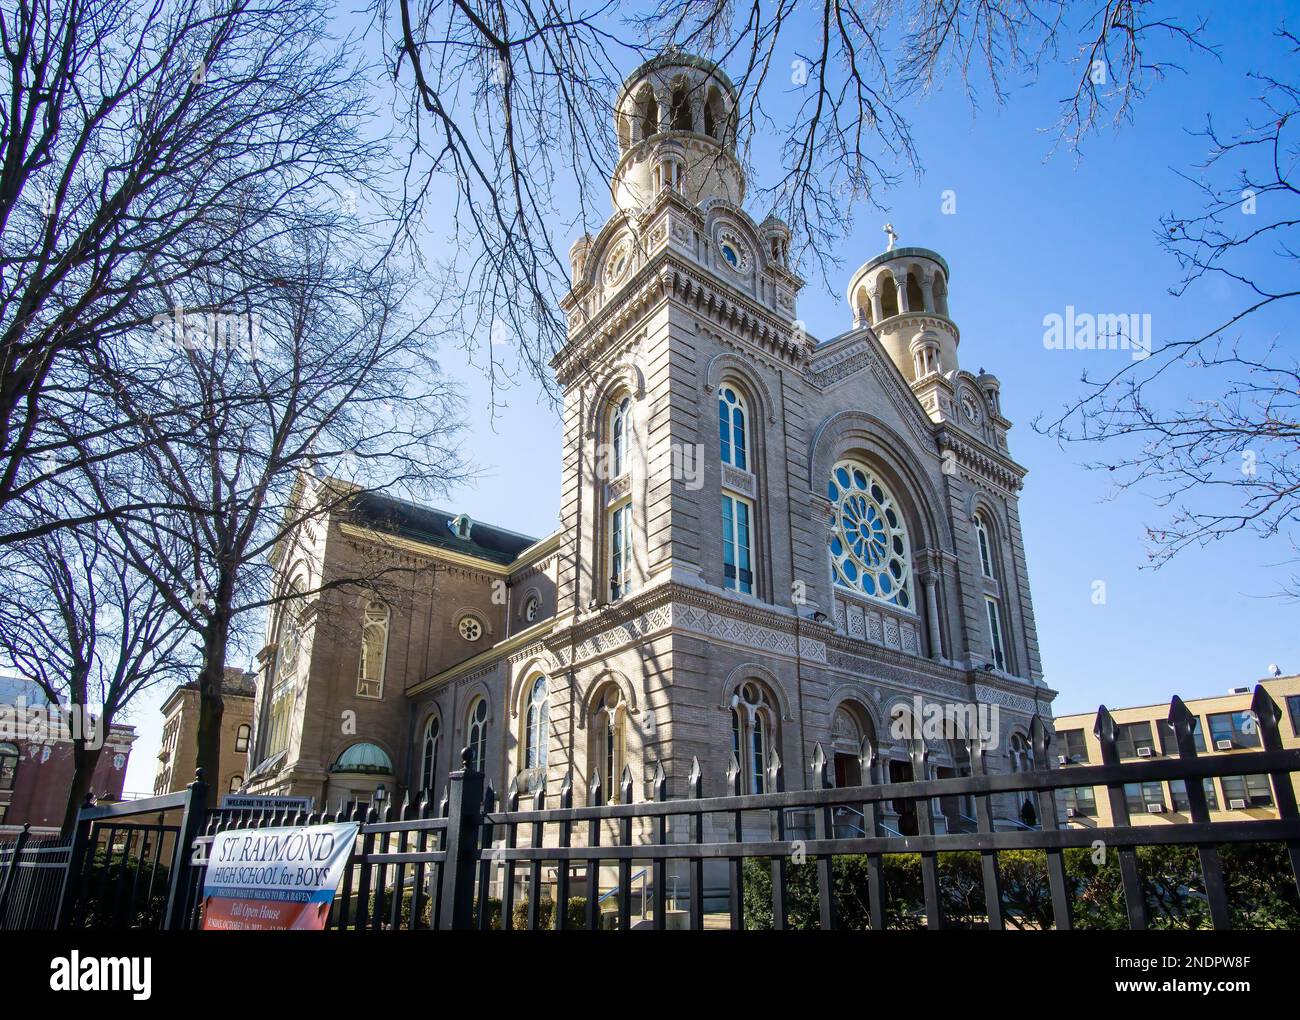 Bronx, NY - USA - Feb 11, 2023 Head on view of the Byzantine Revival-style St. Raymond's Church, a parish church in the Bronx. Designed by George H. S Stock Photo